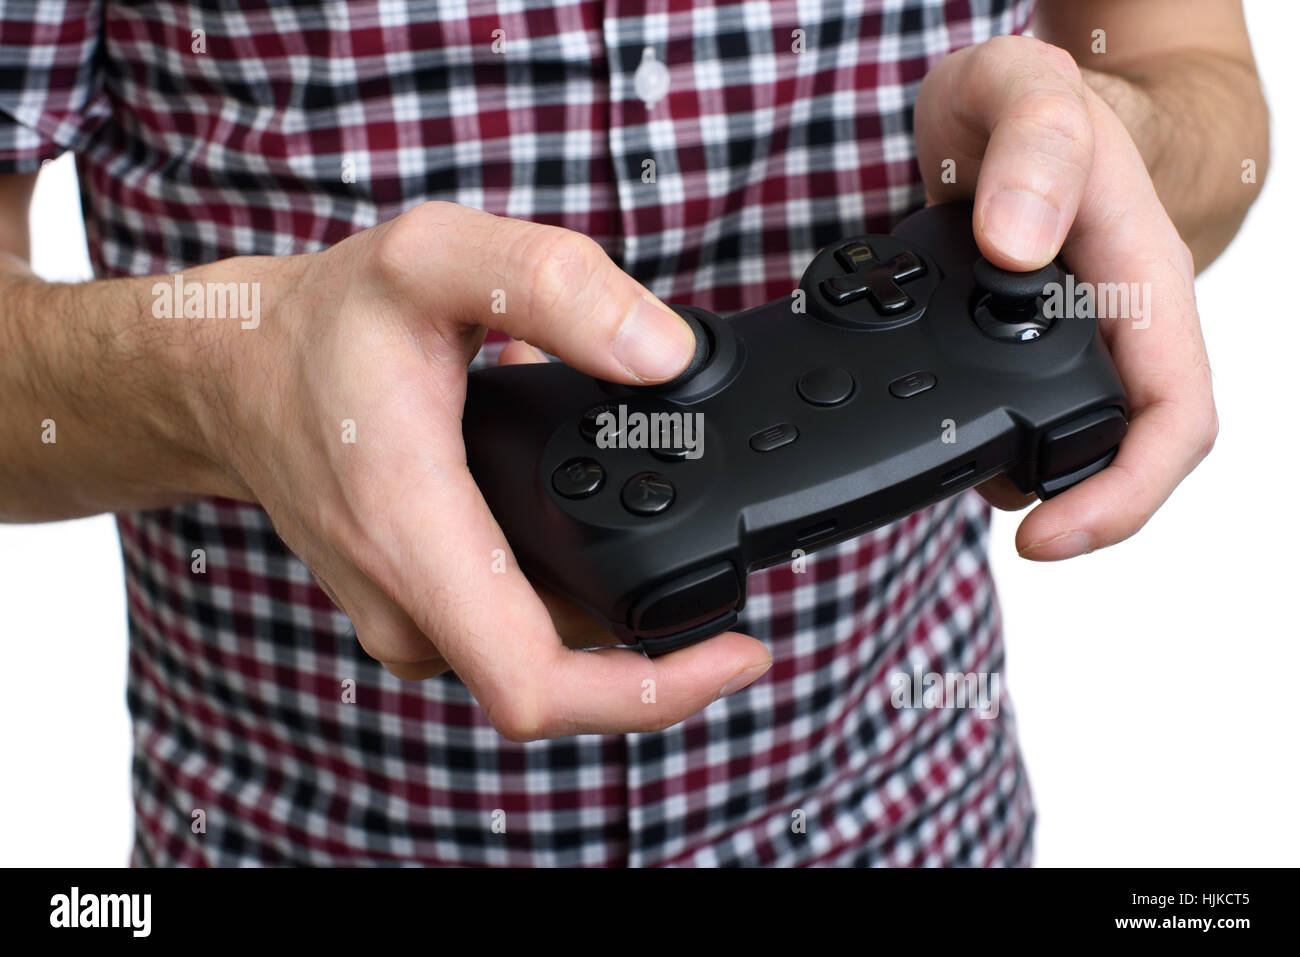 Premium Photo  Close up of gamer holding controller to play video games in  front of computer. player using joystick and playing online games on  monitor, sitting at desk. man gaming with